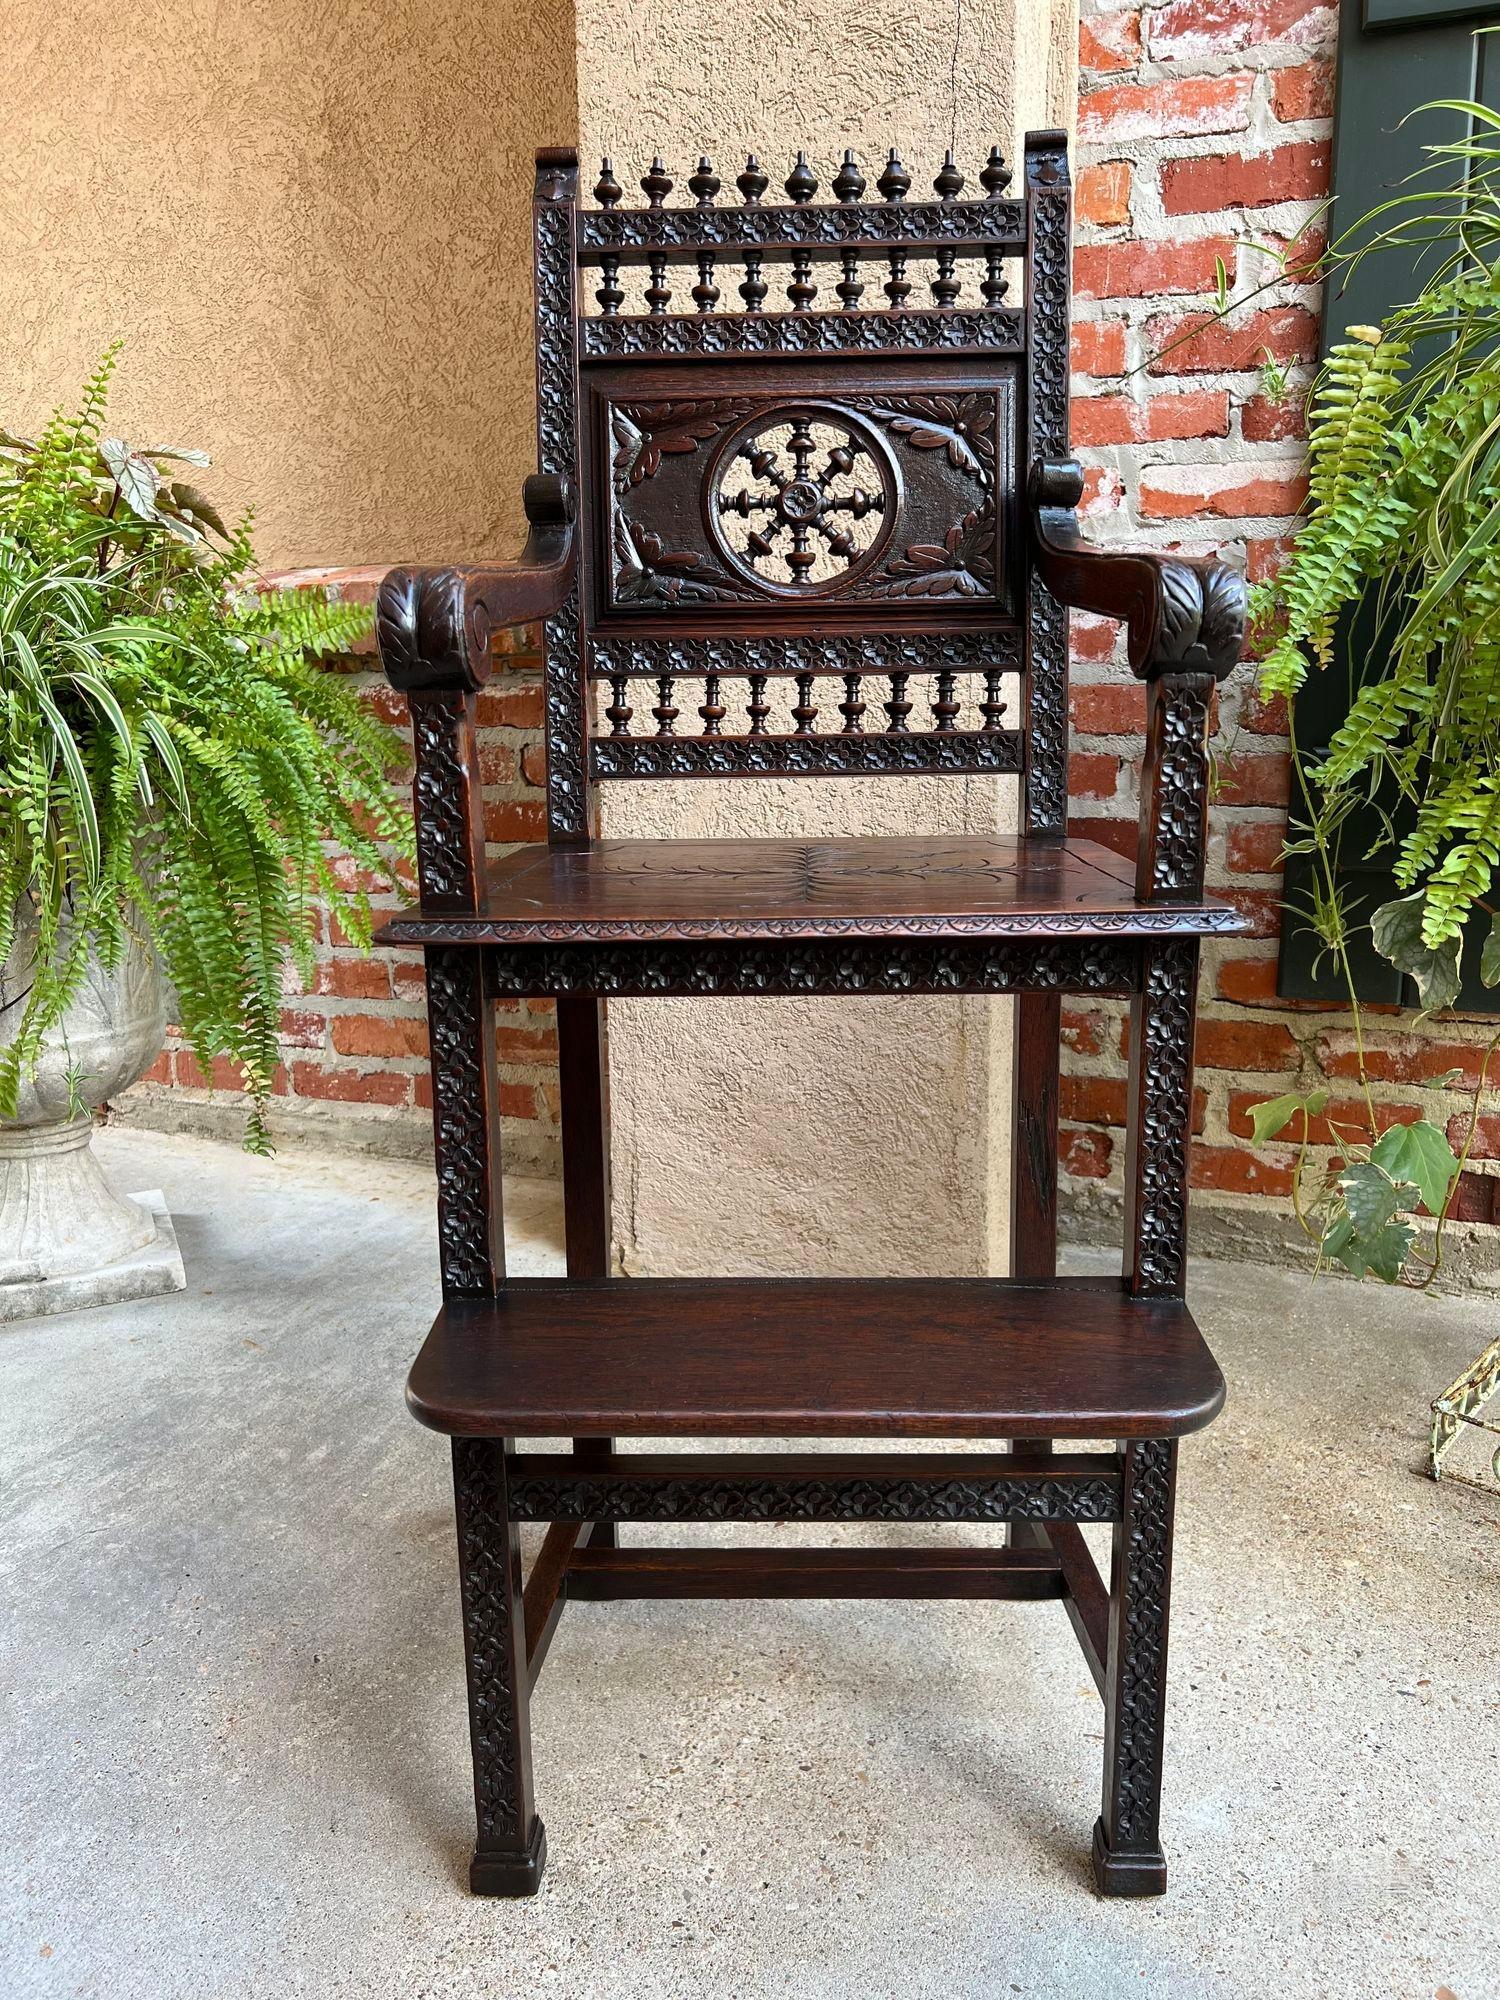 Antique French Child Doll High Chair Brittany Breton Ship Spindle Carved Dark Oak.

Direct from France, and quite a rare find, this lovely hand carved 19th century high chair!
NOTE: The style and design are true to the Celtic roots of the Brittany